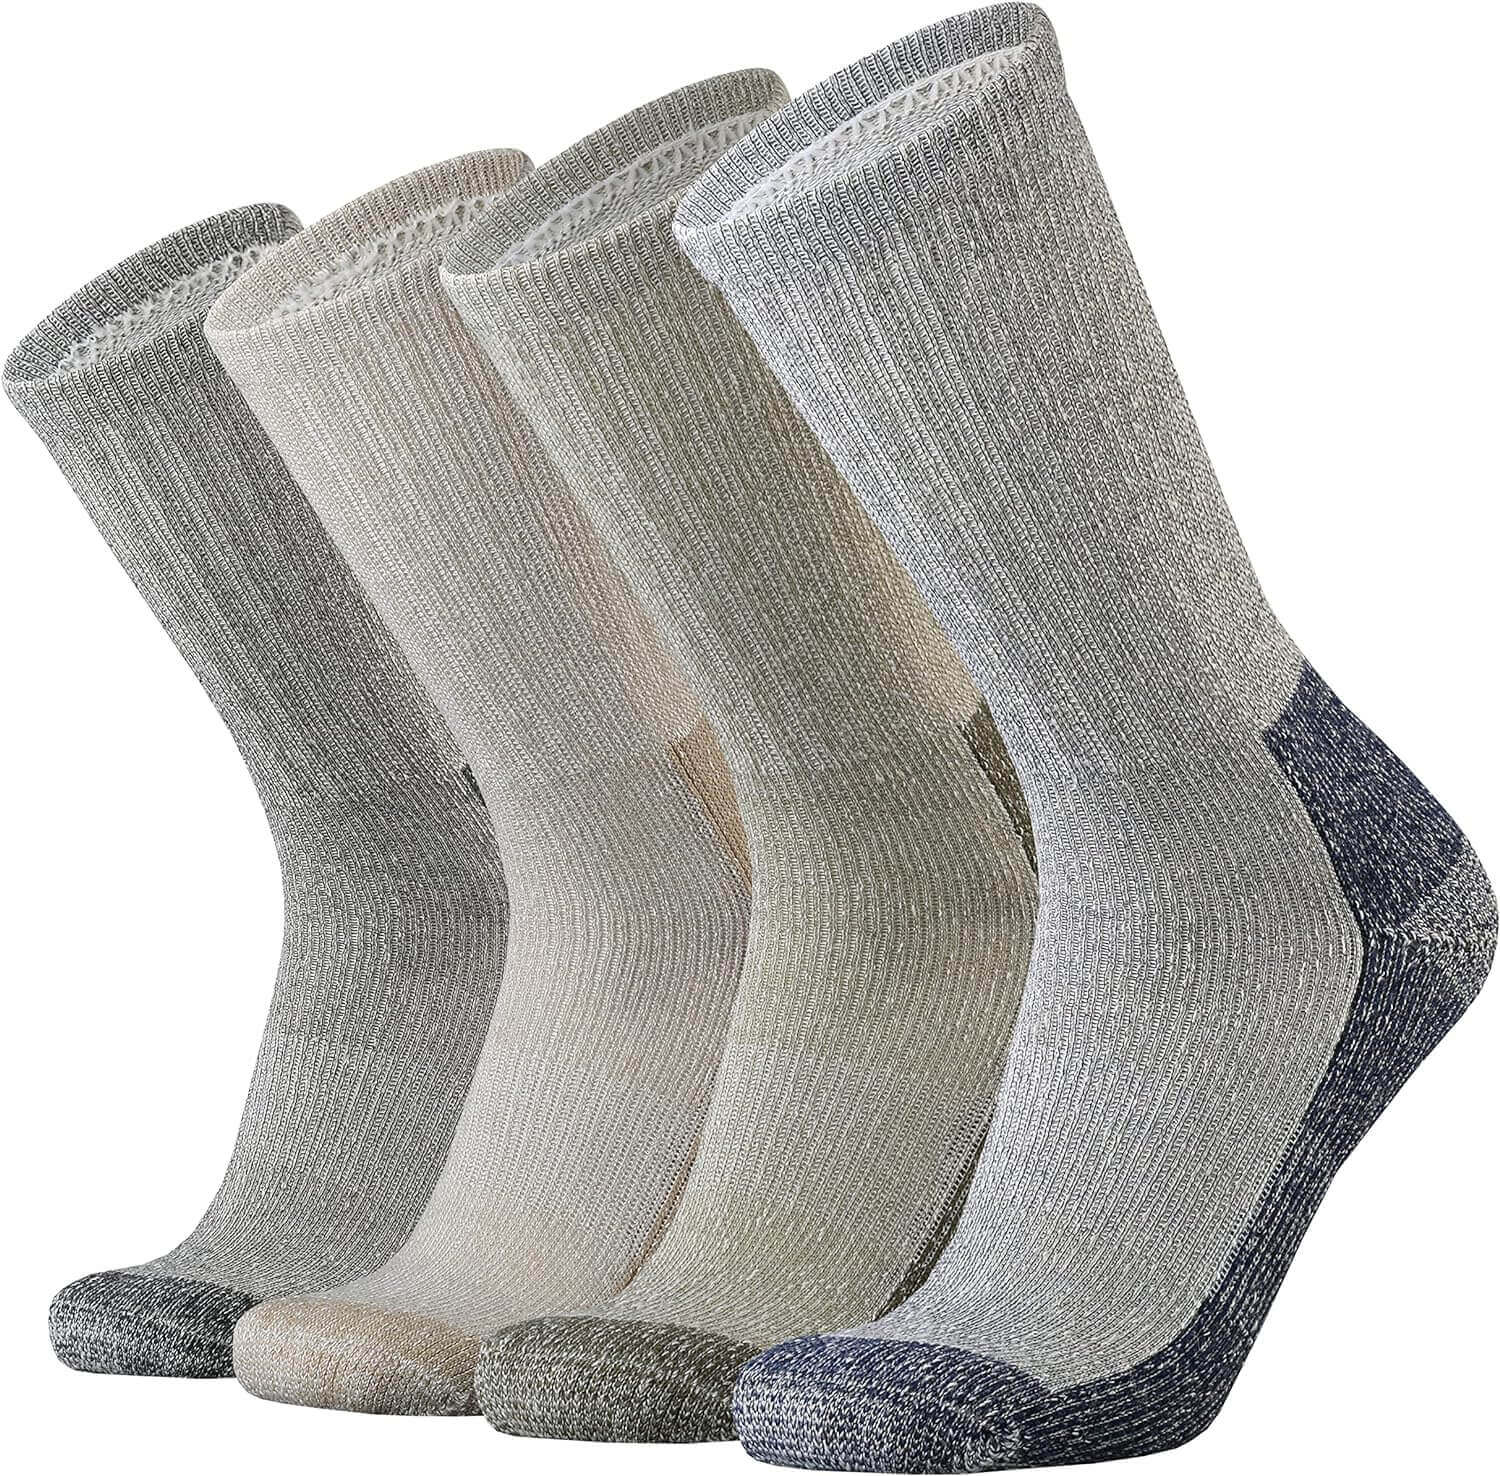 Shop The Latest >SOX TOWN Men's Merino Wool Cushion Crew Socks > *Only $34.99*> From The Top Brand > *Sox Townl* > Shop Now and Get Free Shipping On Orders Over $45.00 >*Shop Earth Foot*